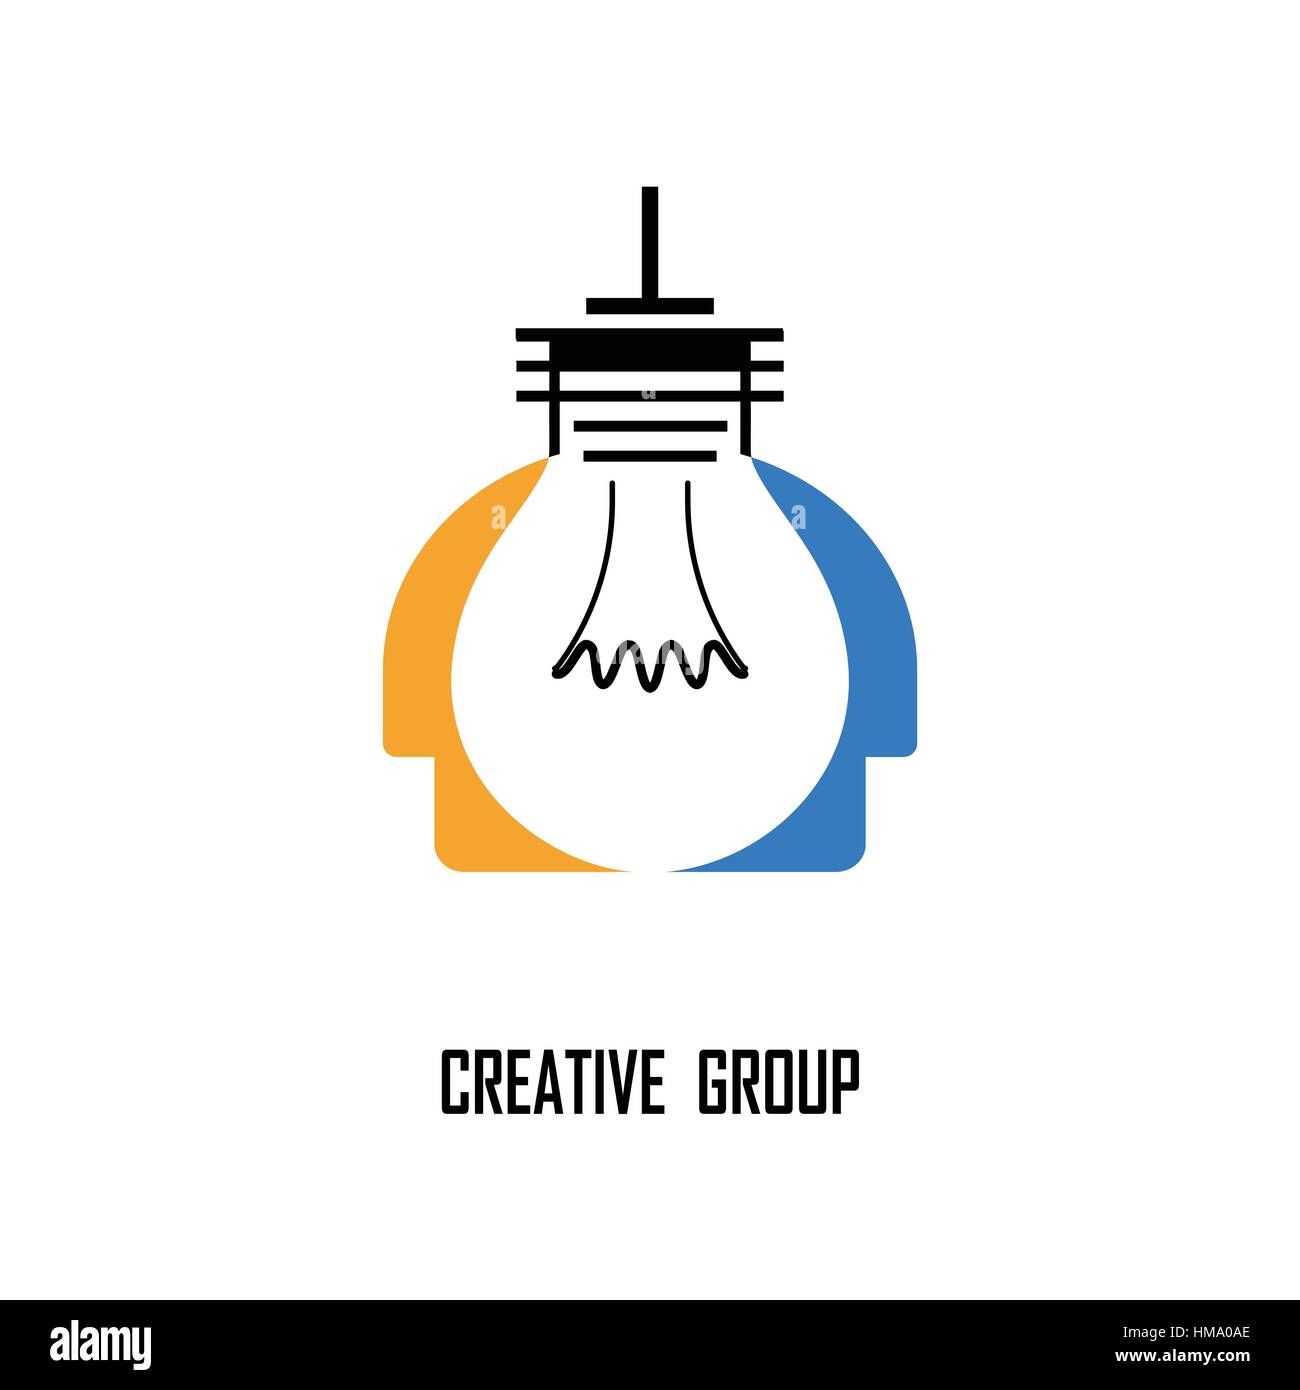 Creative light bulb and Human heads vector design banner template.Corporate business and industrial creative logotype symbol.Brainstorming Stock Vector